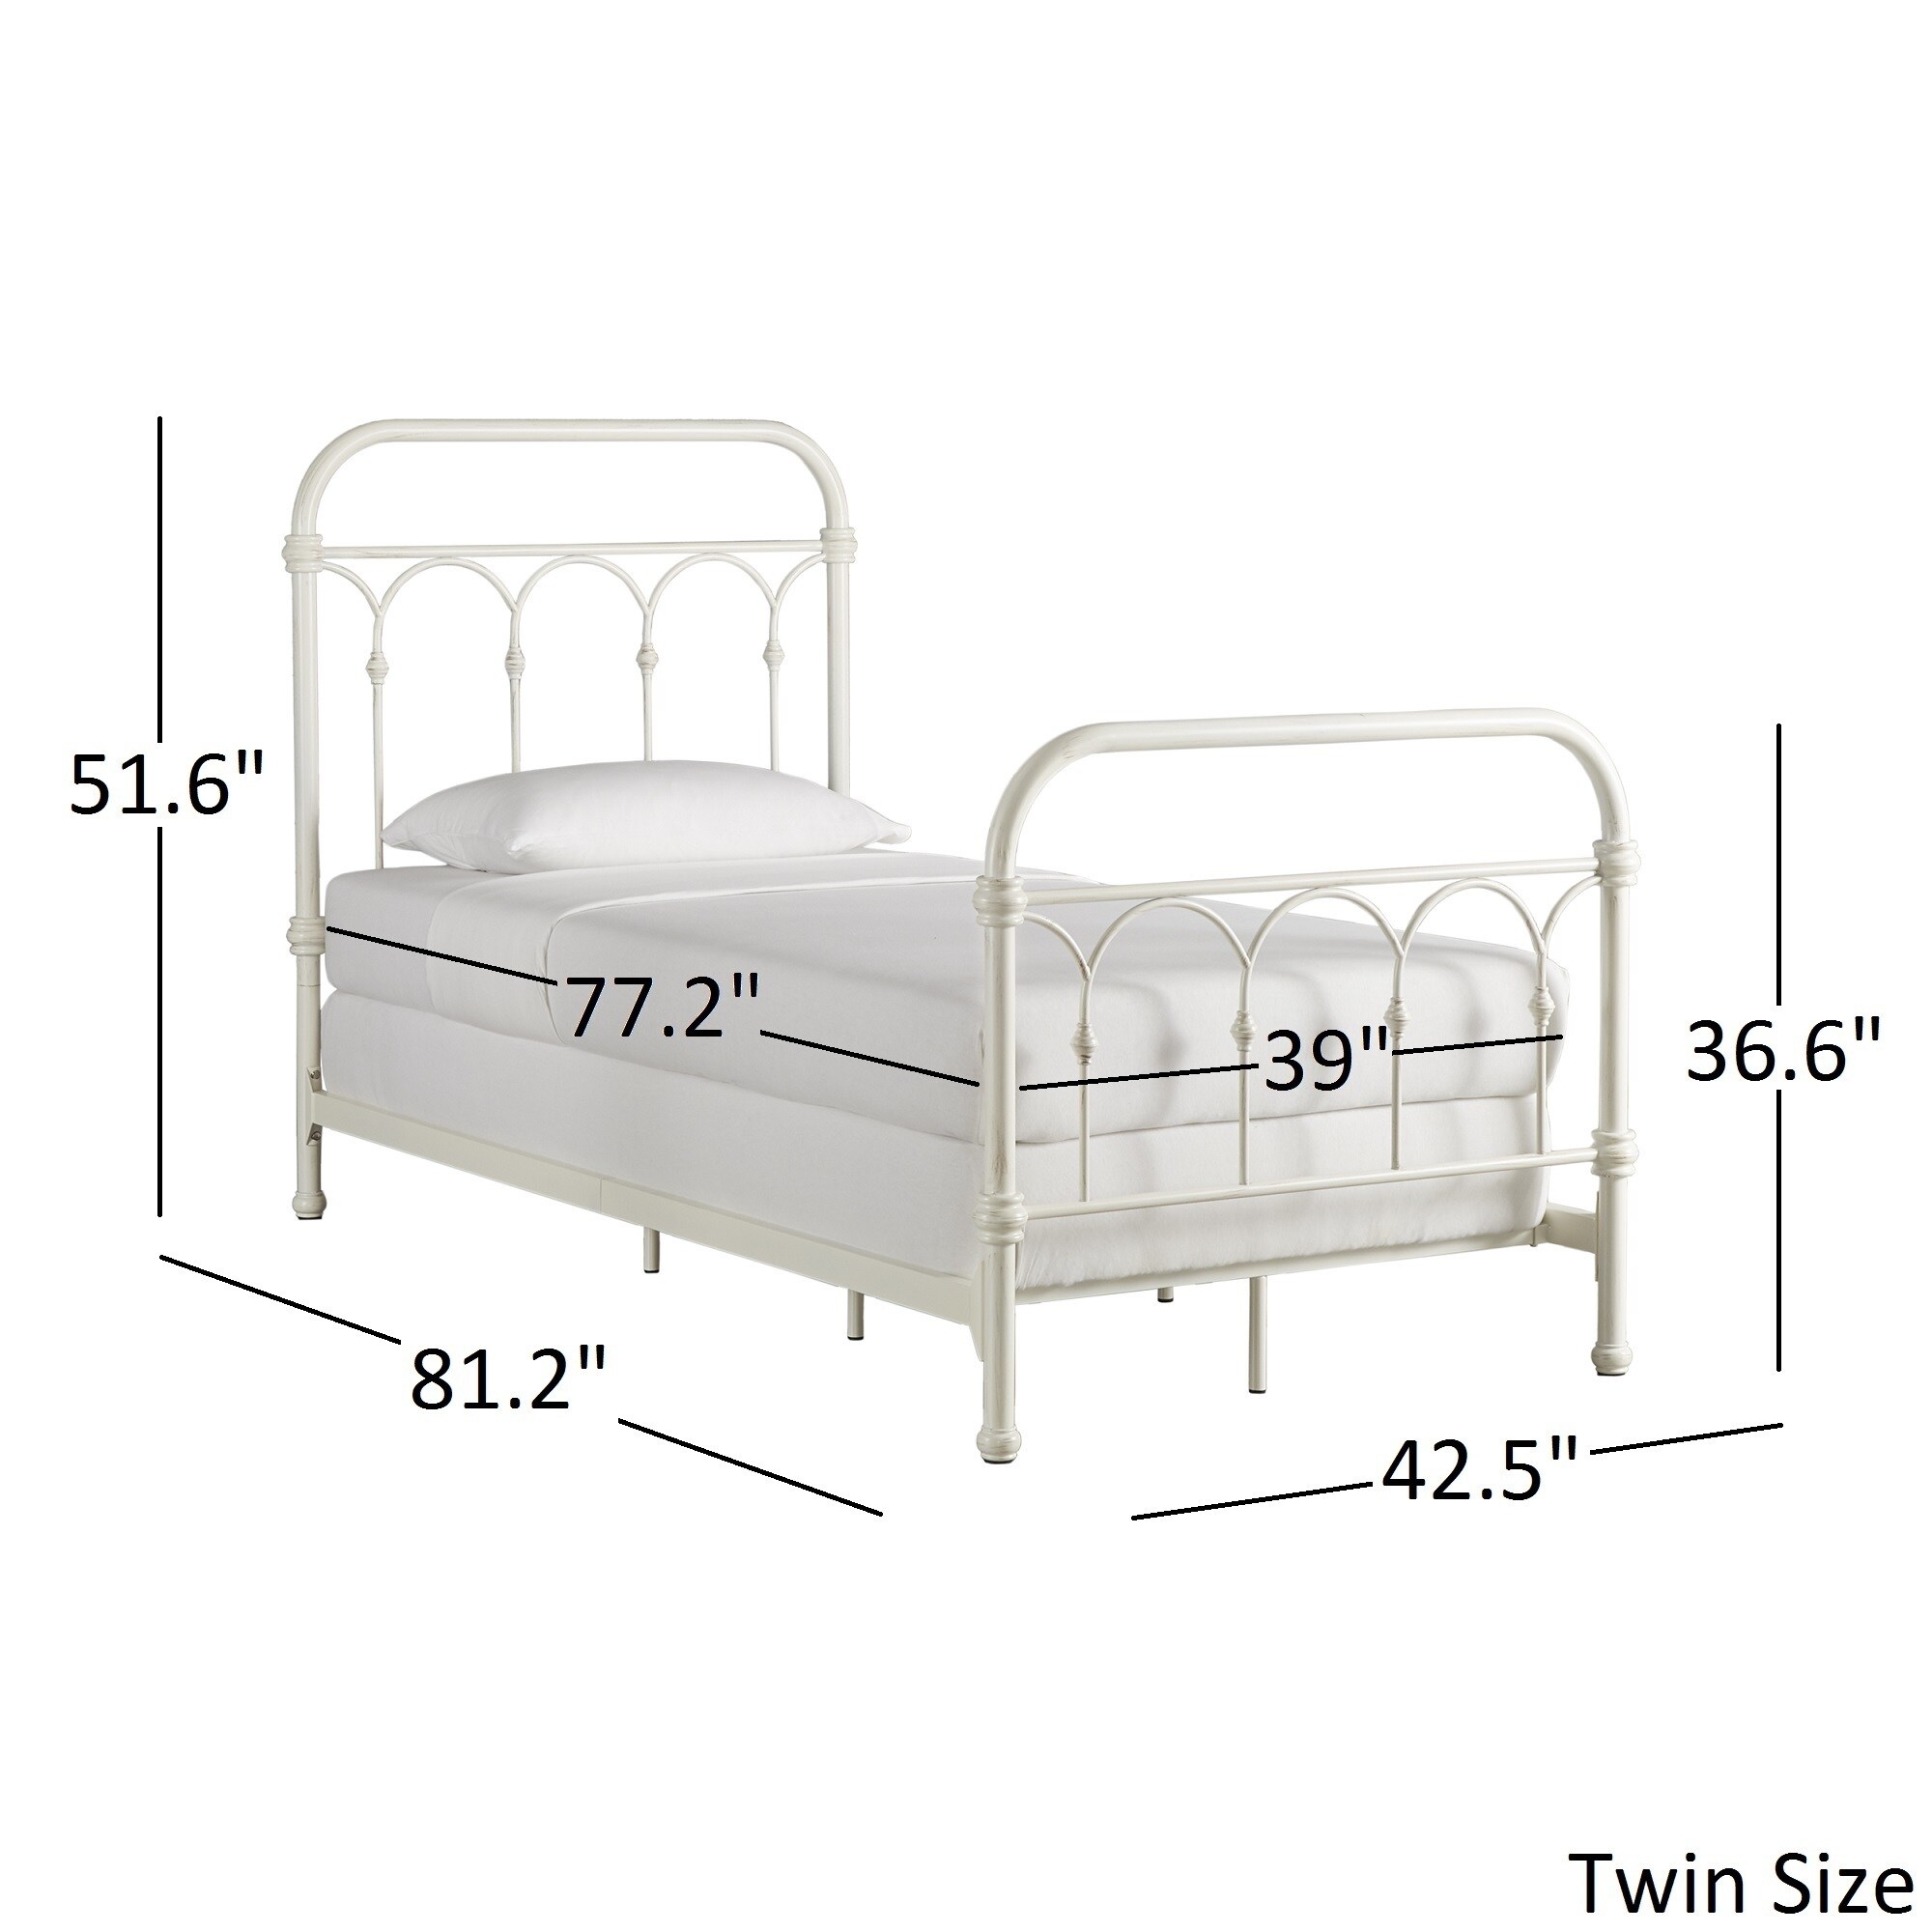 Details about   Mercer Casted Knot Metal Bed By INSPIRE Q Classic 